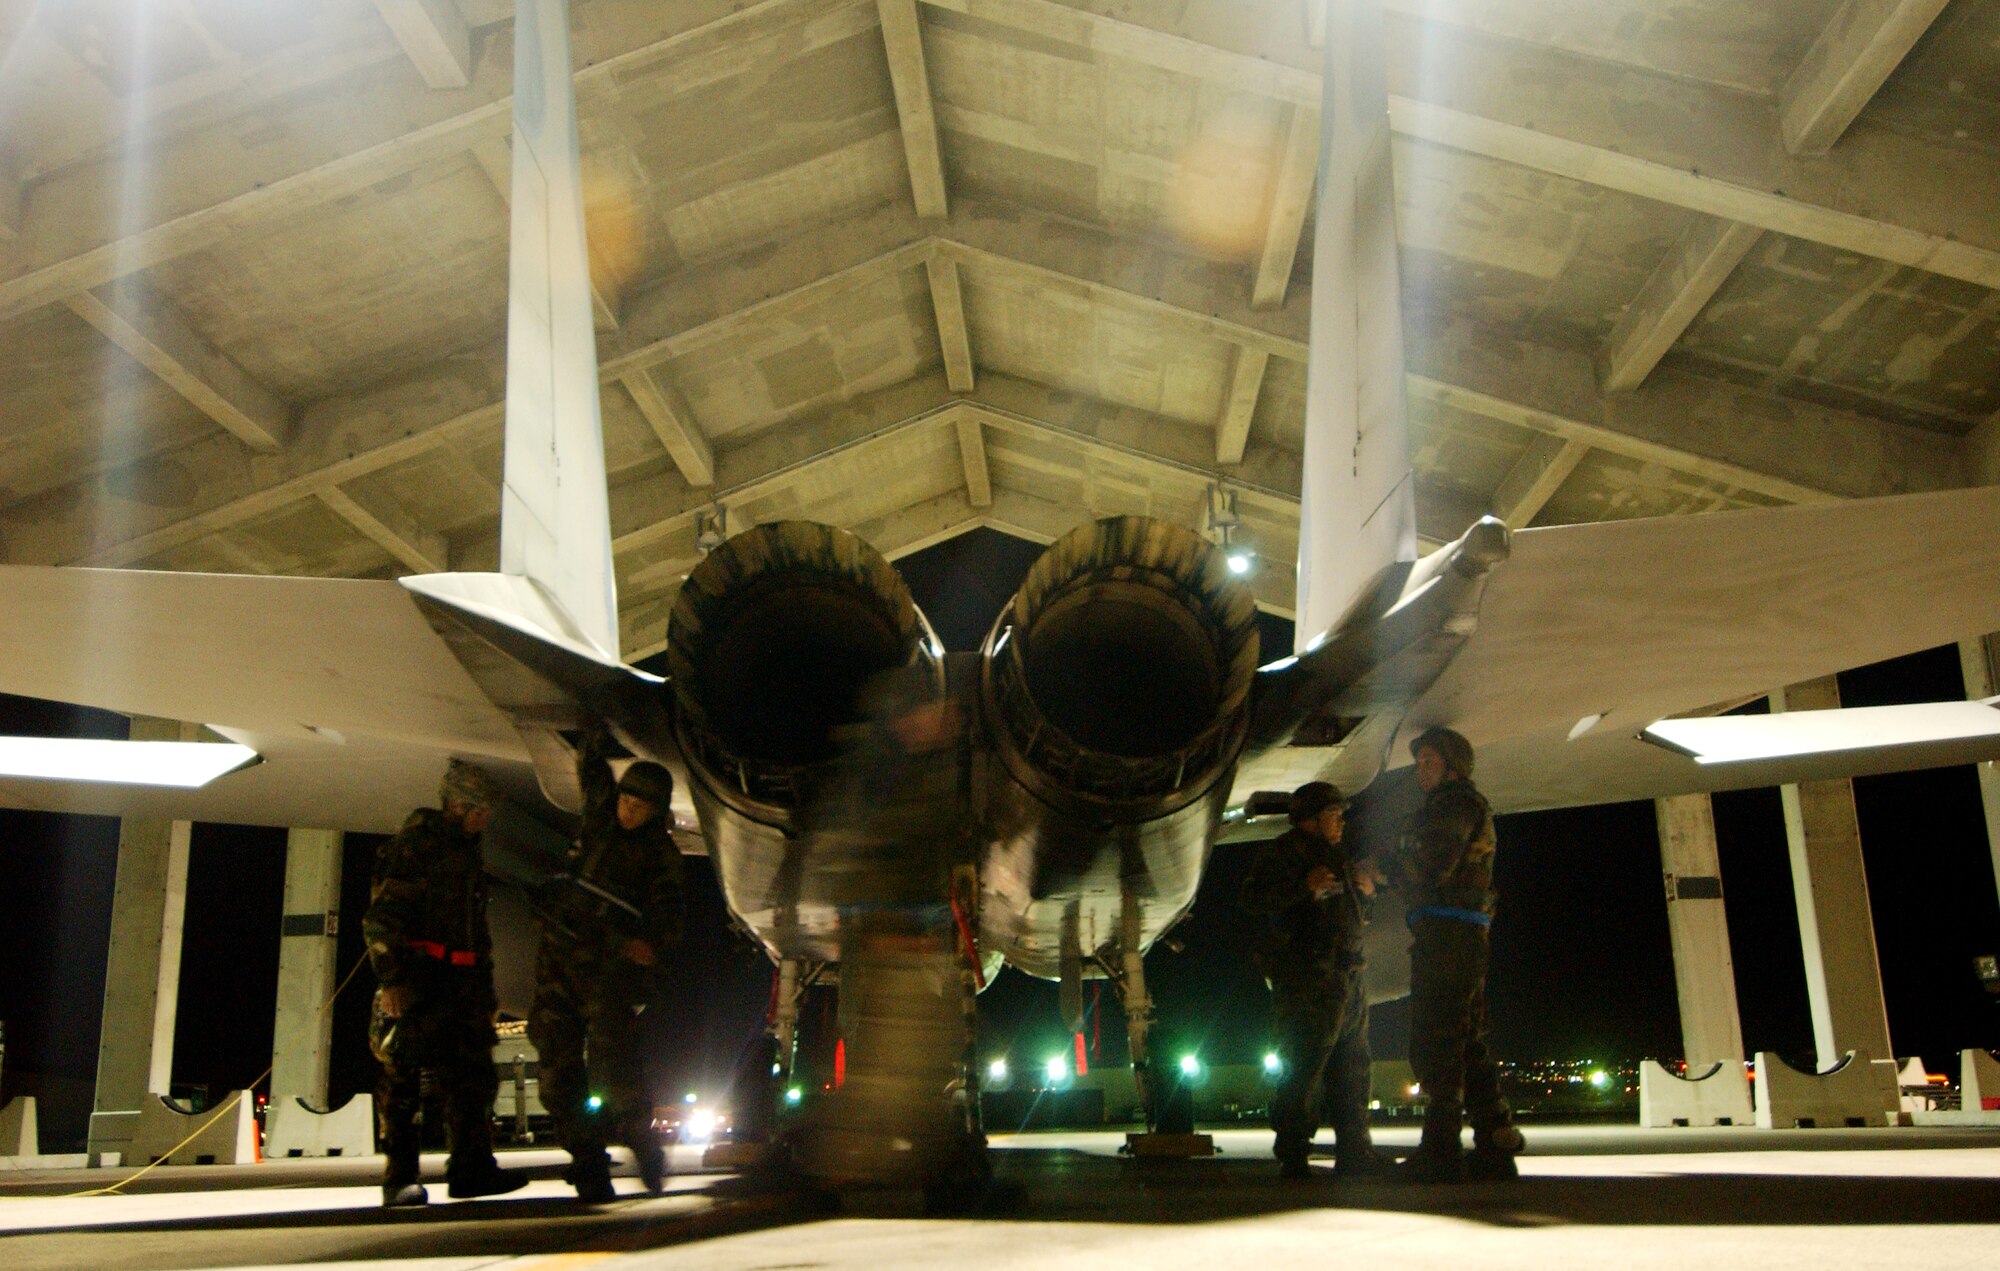 Airmen from the 44th Aircraft Maintenance Unit drop panels from an F-15C Eagle to check the stag actuators for flight control problems Dec. 4, during Local Operational Readiness Exercise Beverly High 09-01 at Kadena Air Base, Japan. The 18th Wing is conducting the exercise to test the readiness of Kadena Airmen.  (U.S. Air Force photo/Tech. Sgt. Rey Ramon)    